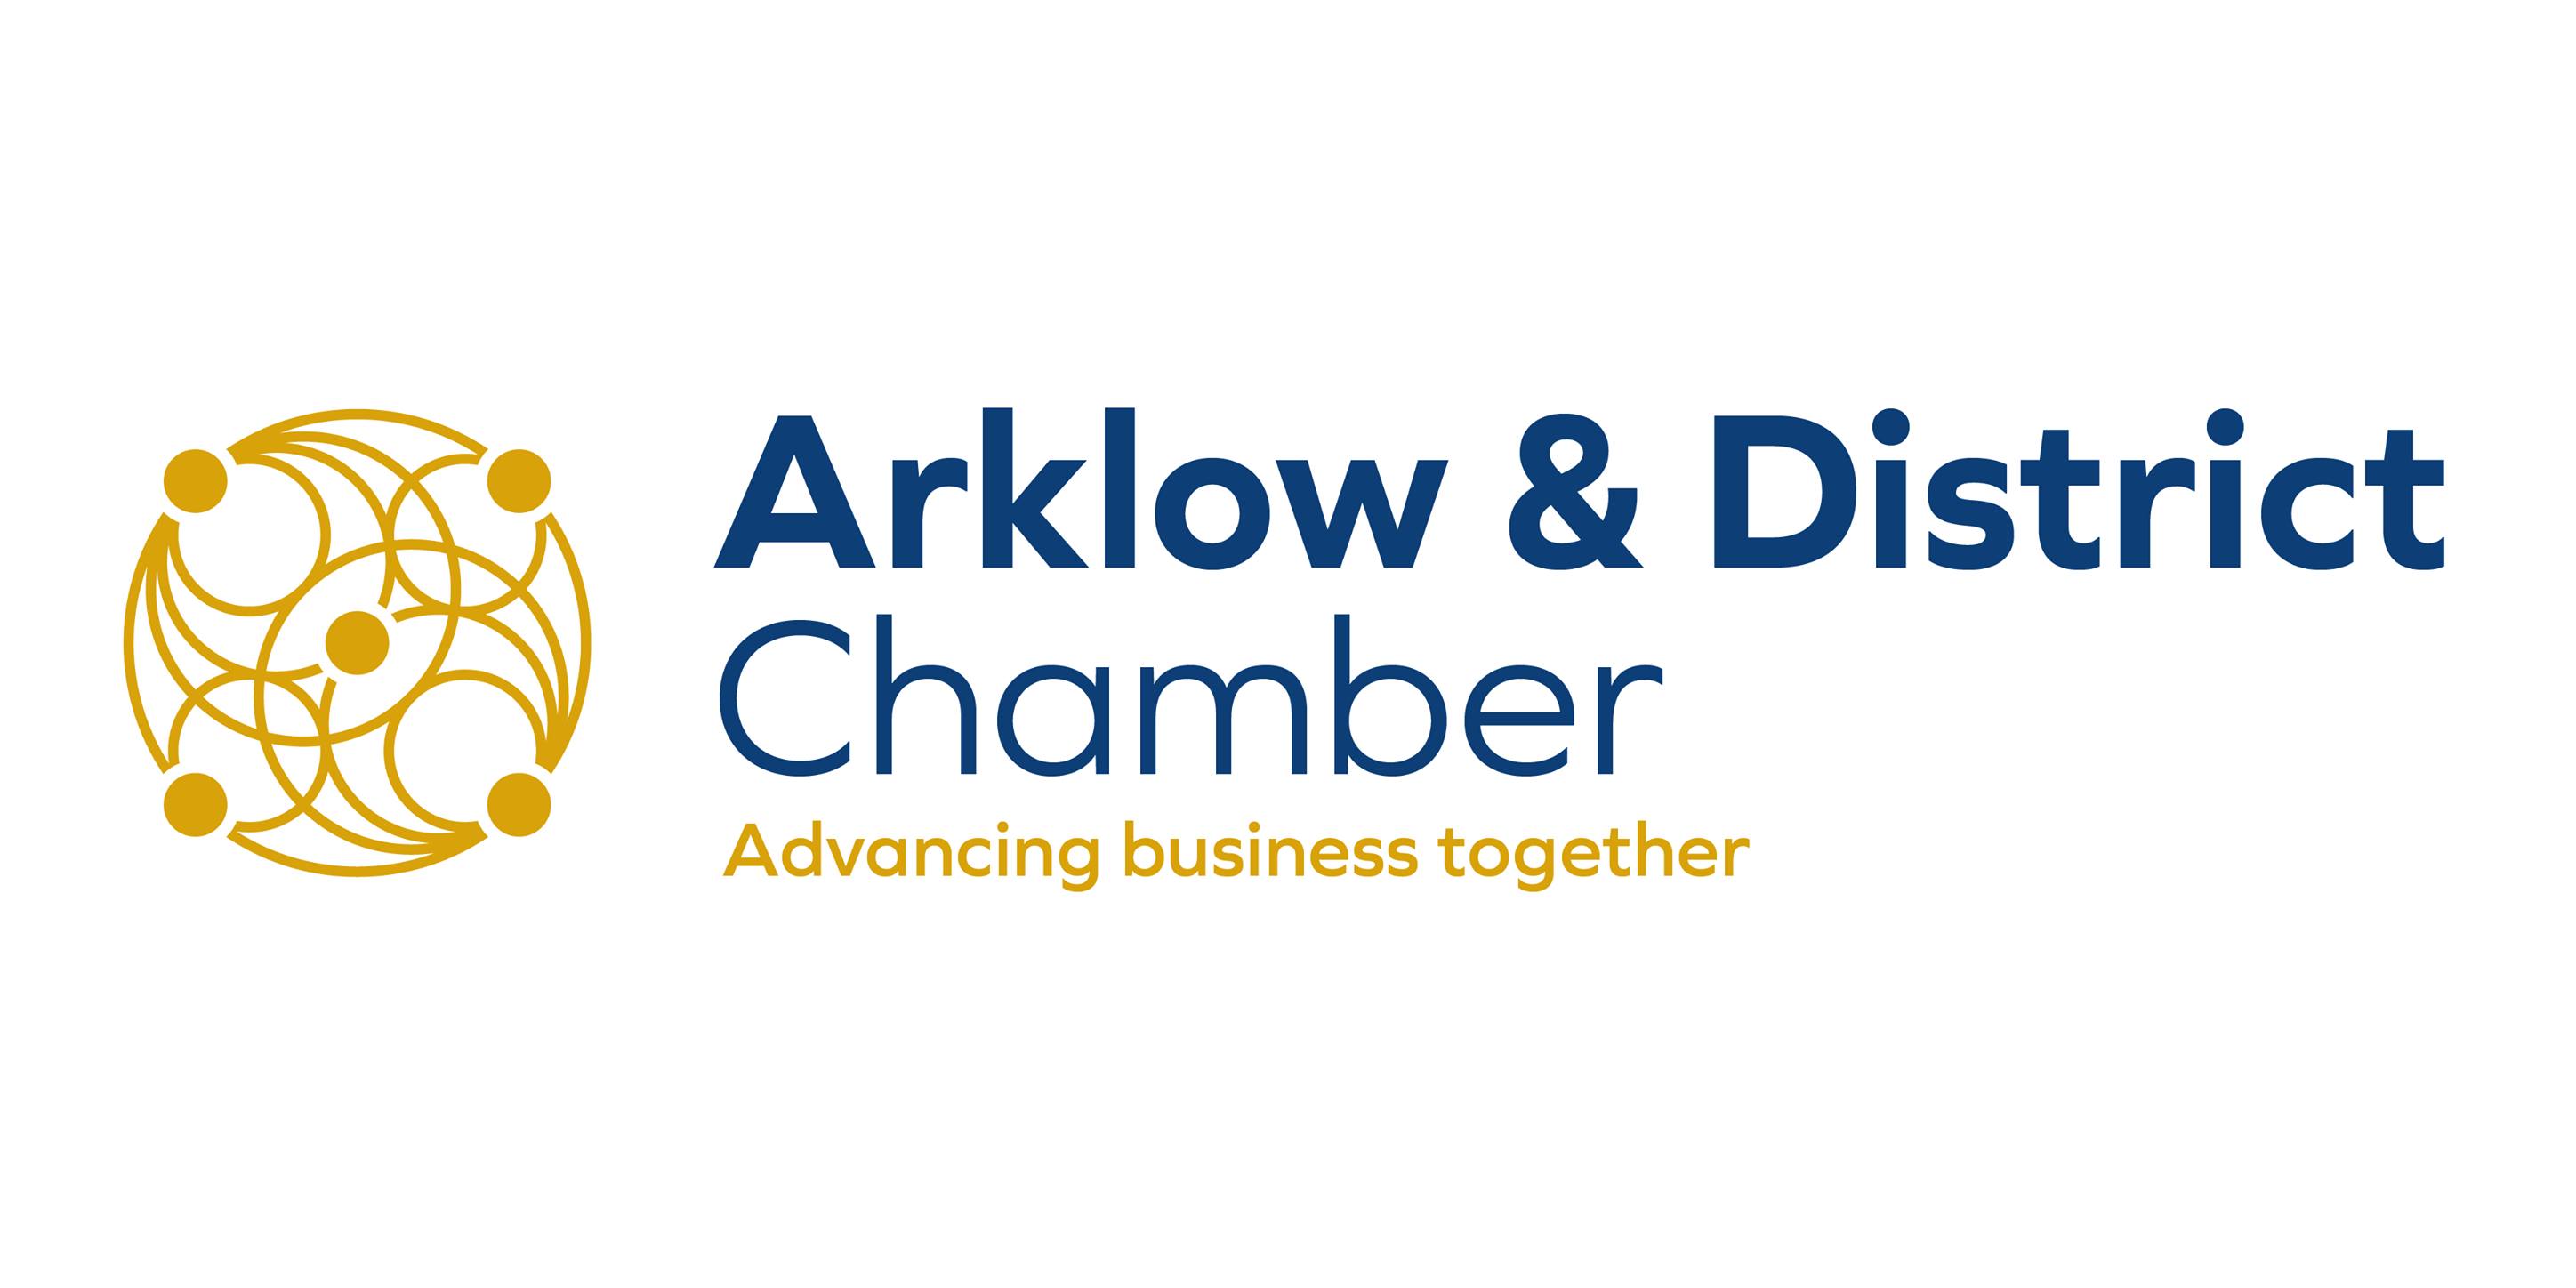 Arklow & District Chamber